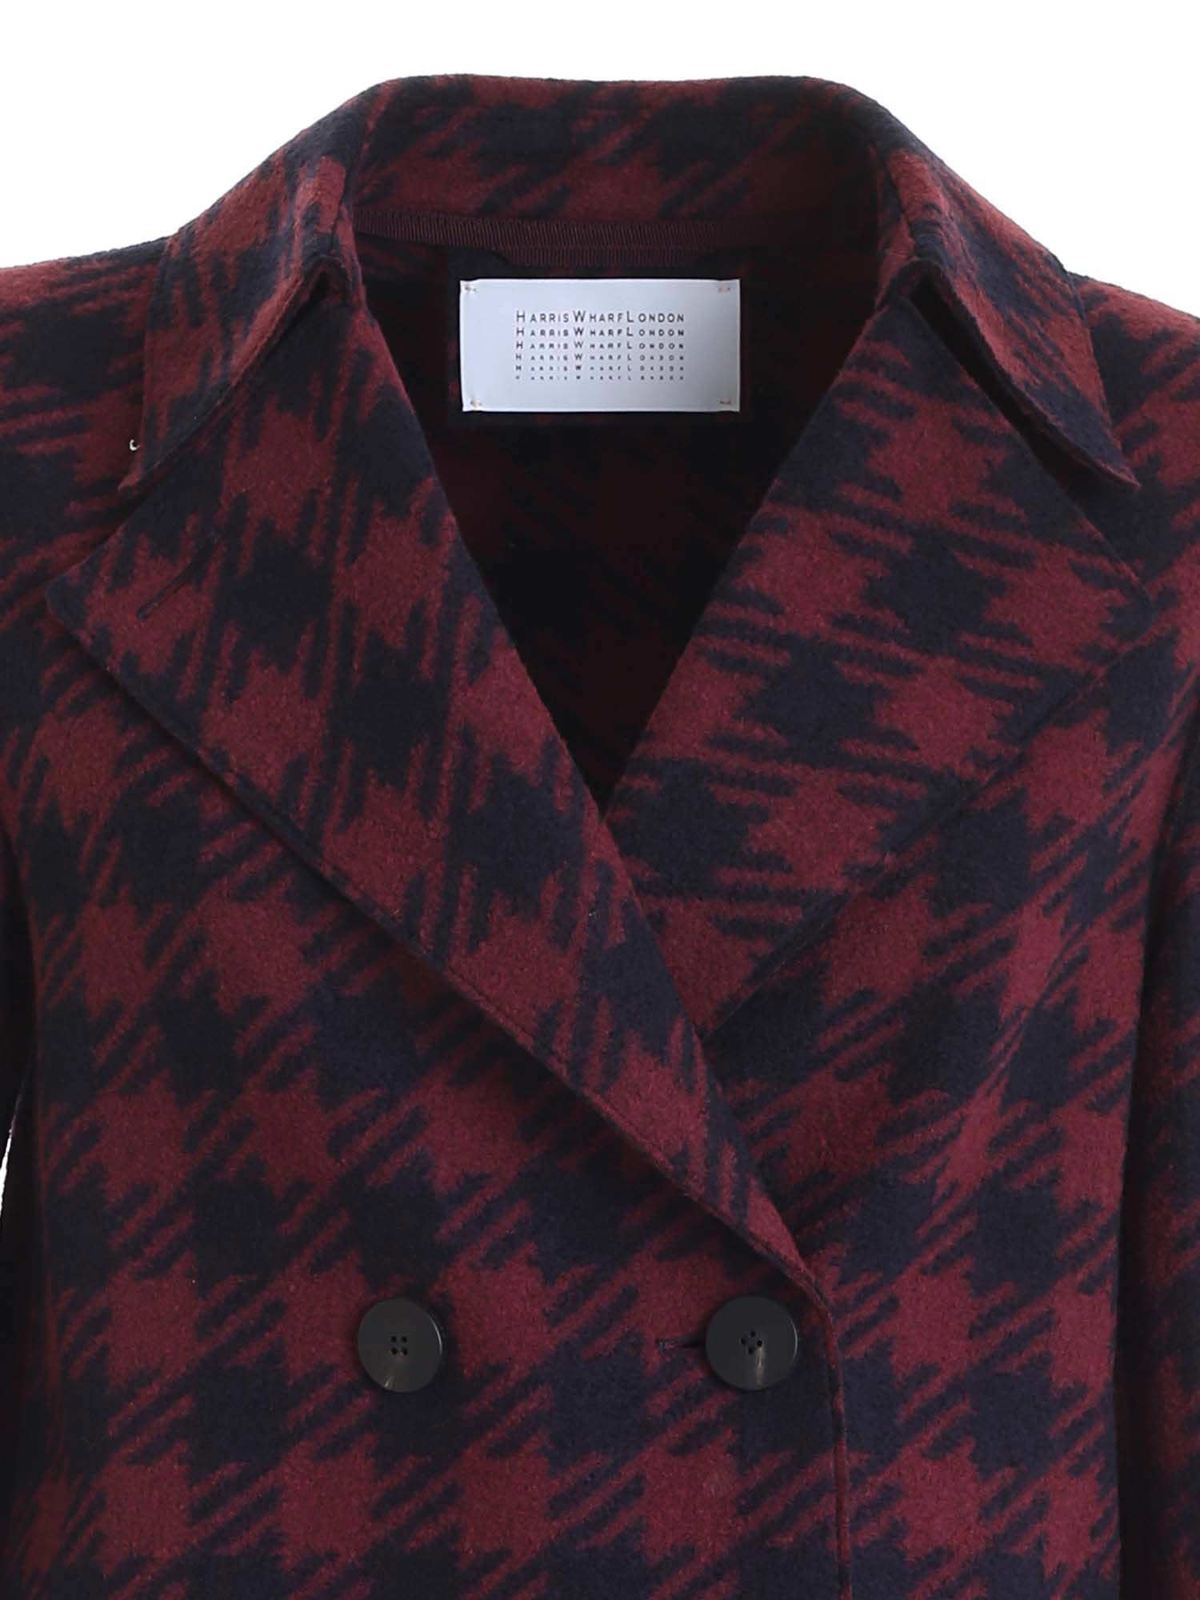 Harris Wharf London - Houndstooth jacket in blue and burgundy color ...